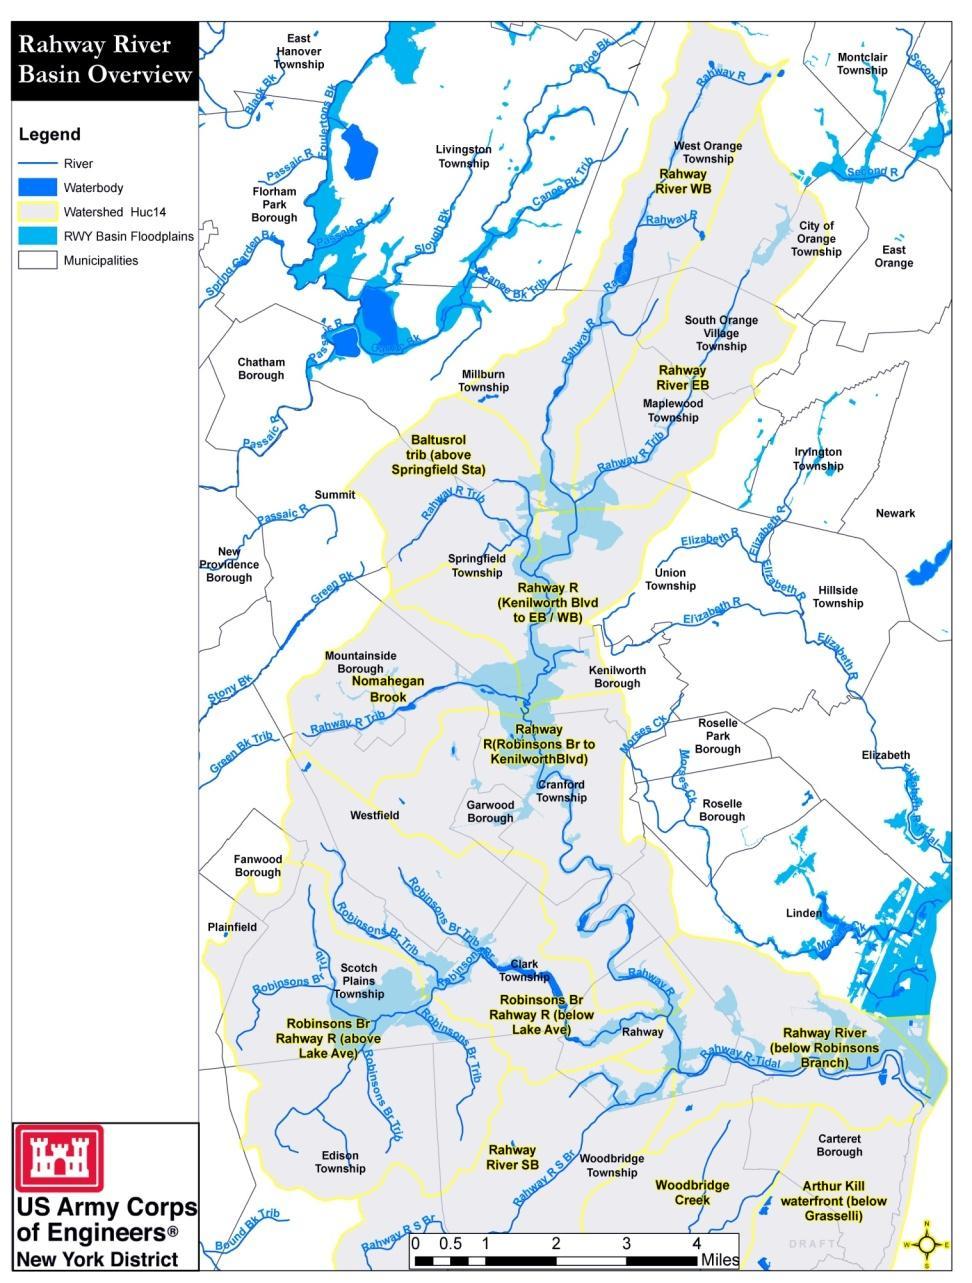 Study Area The Rahway River Basin has a drainage area of approximately 82 square miles and encompasses Essex, Union, and Middlesex counties.